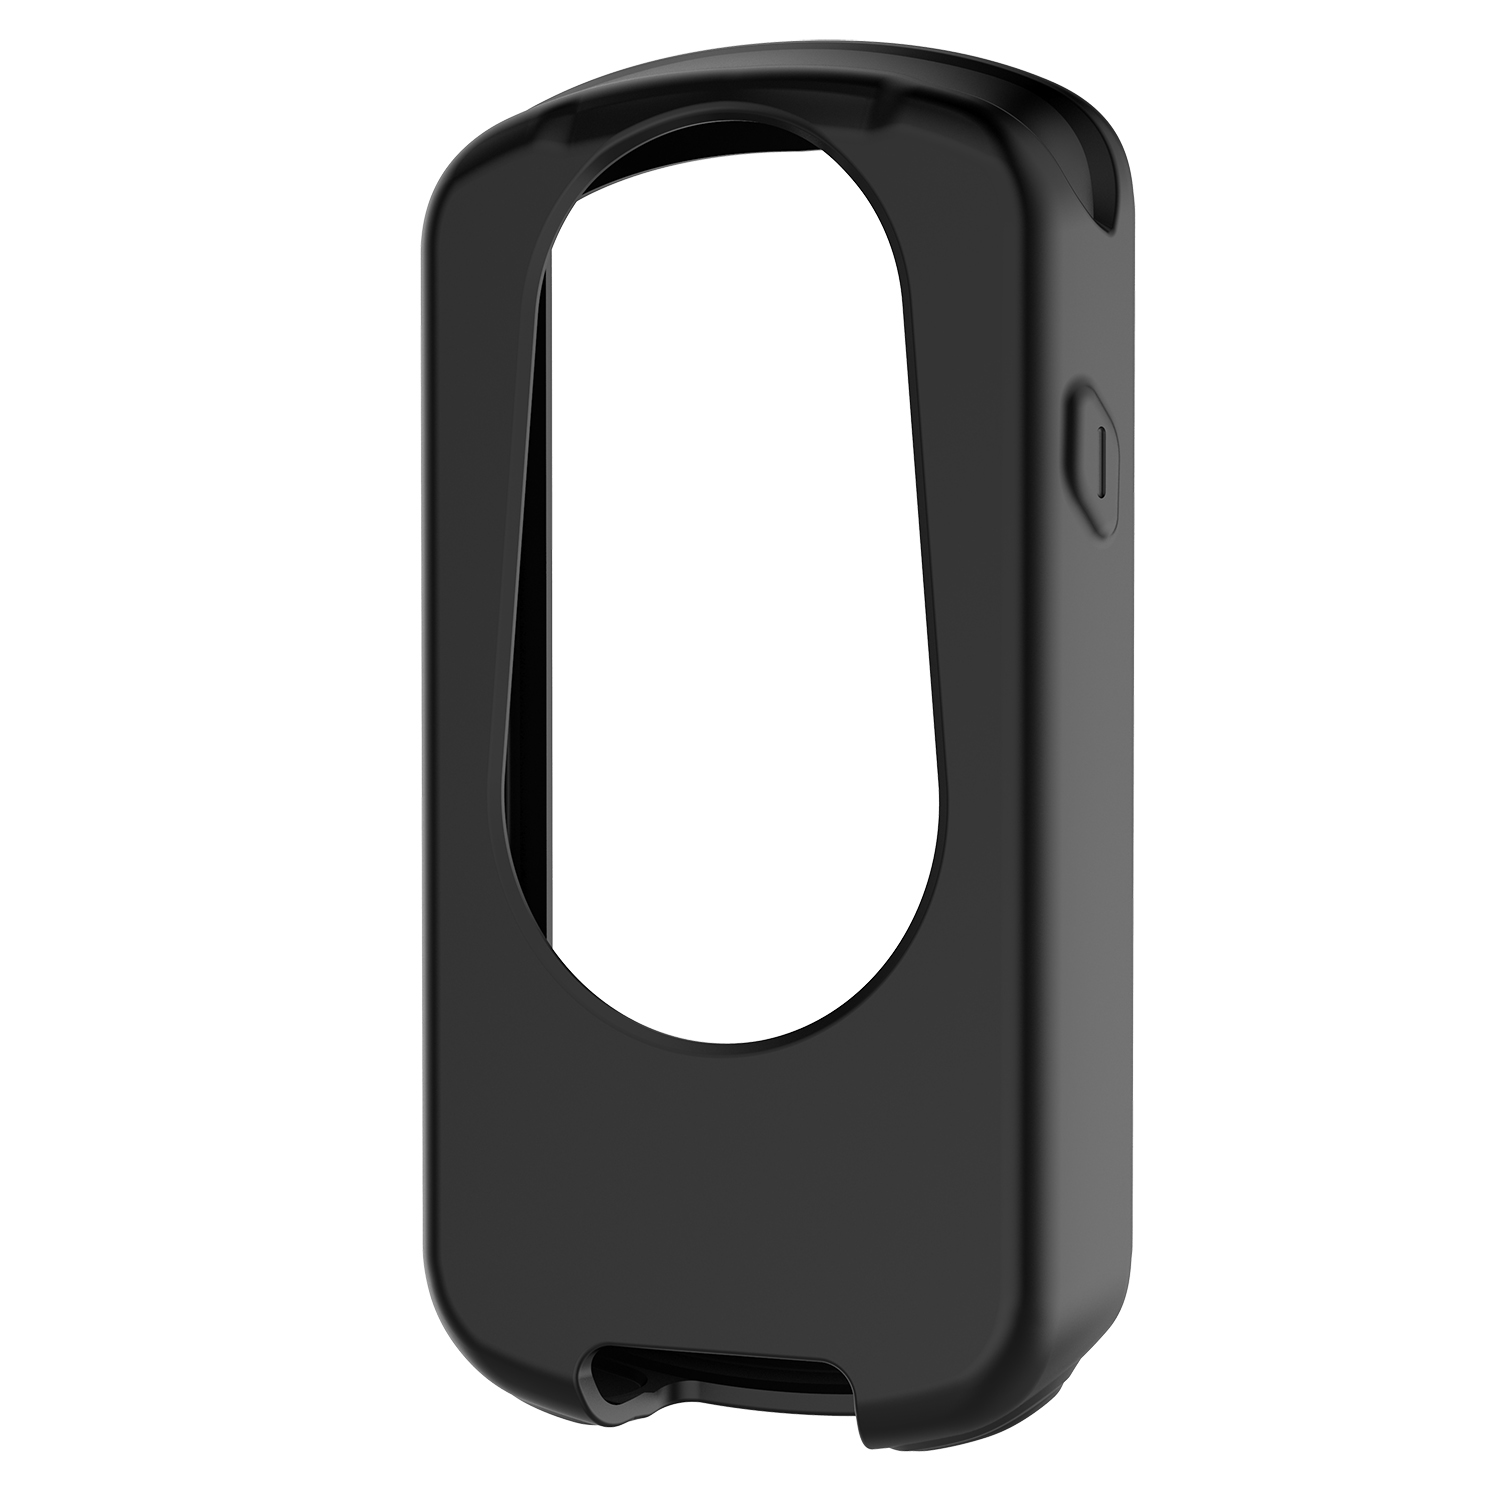 Bakeey-Bicycle-GPS-Computer-Silicone-Protective-Cover-Watch-Cover-Case-Cover-for-Garmin-Edge-1030-Pl-1728822-12